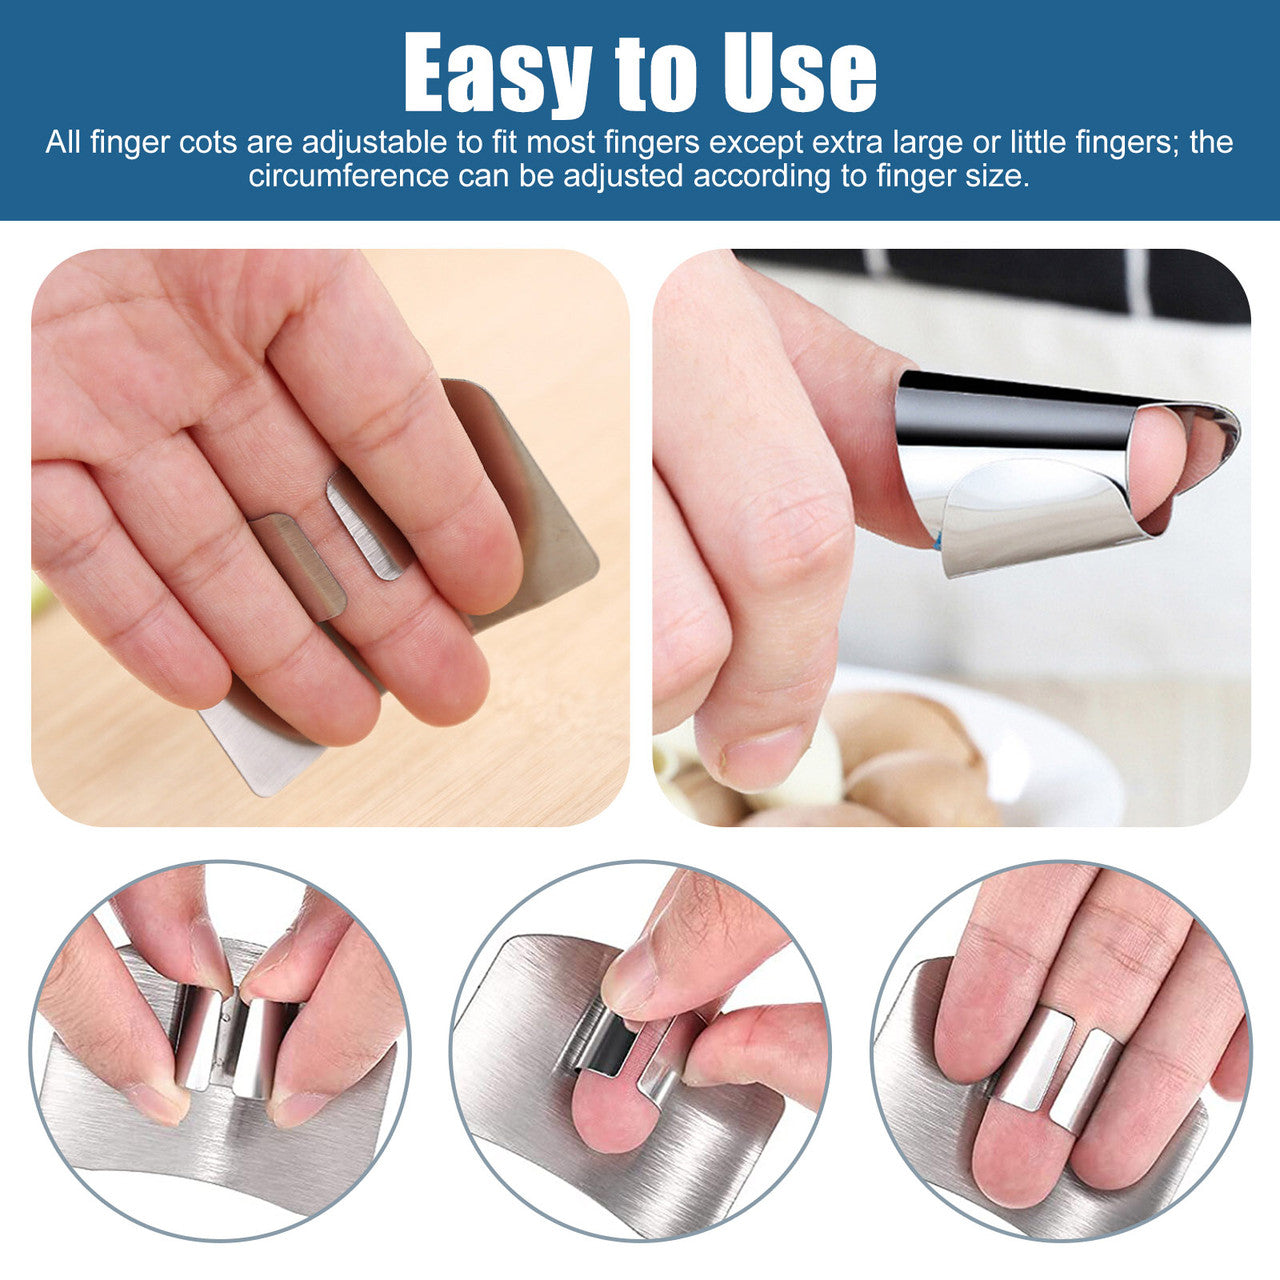 8 Pcs 304 Stainless Steel Finger Guard - Cutting Protector Adjustable Safe Thumb Guard Finger Protector for Chefs Kitchen Staff (Silver)